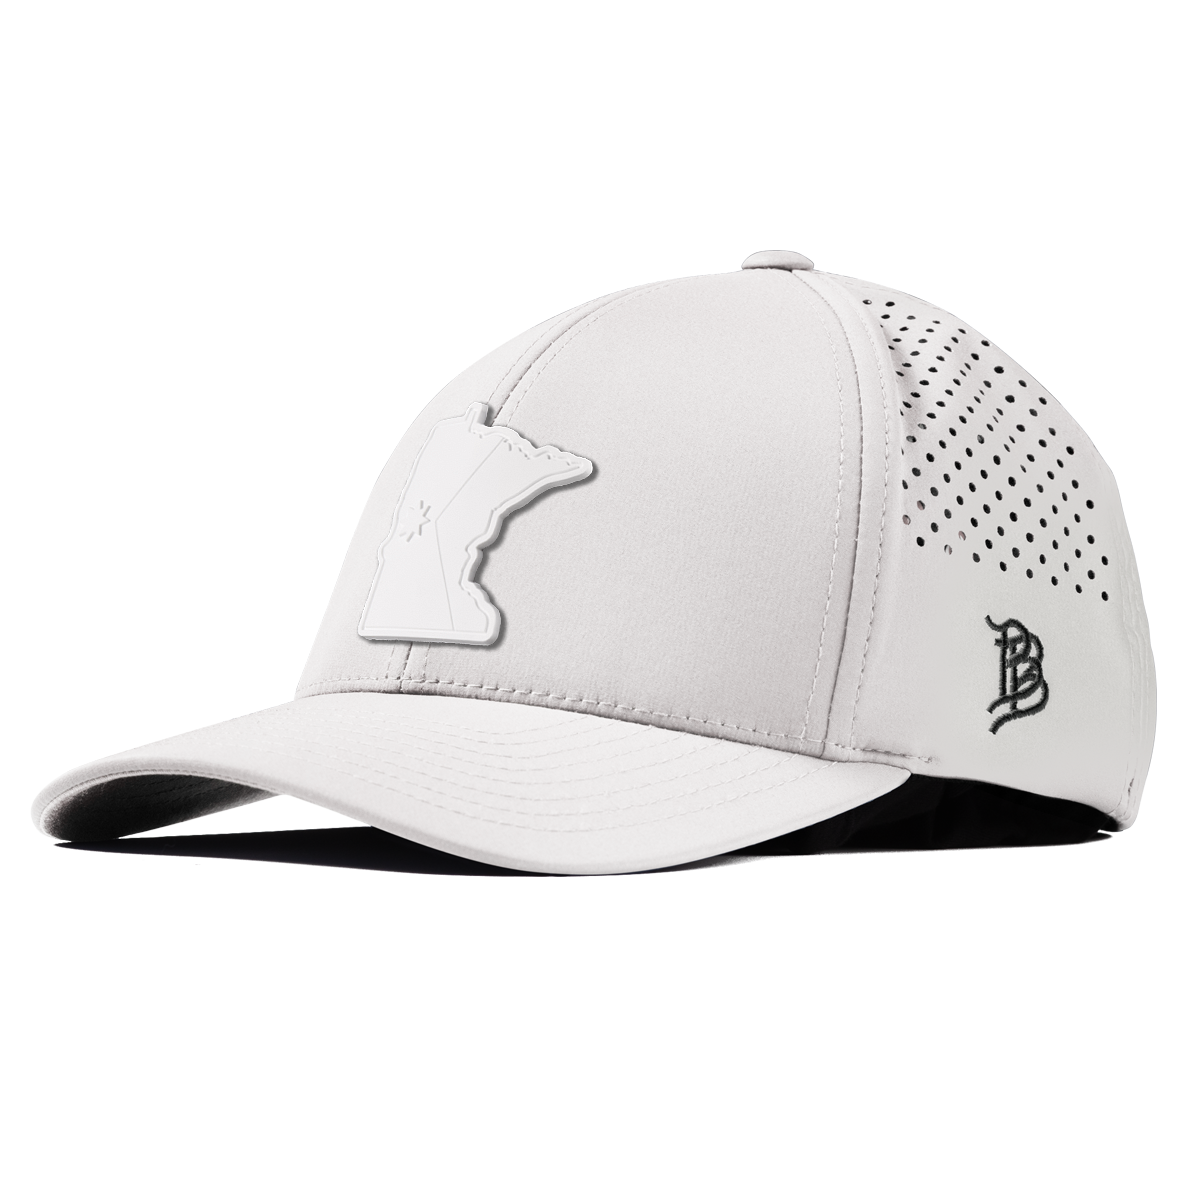 Minnesota Stealth Curved Performance White